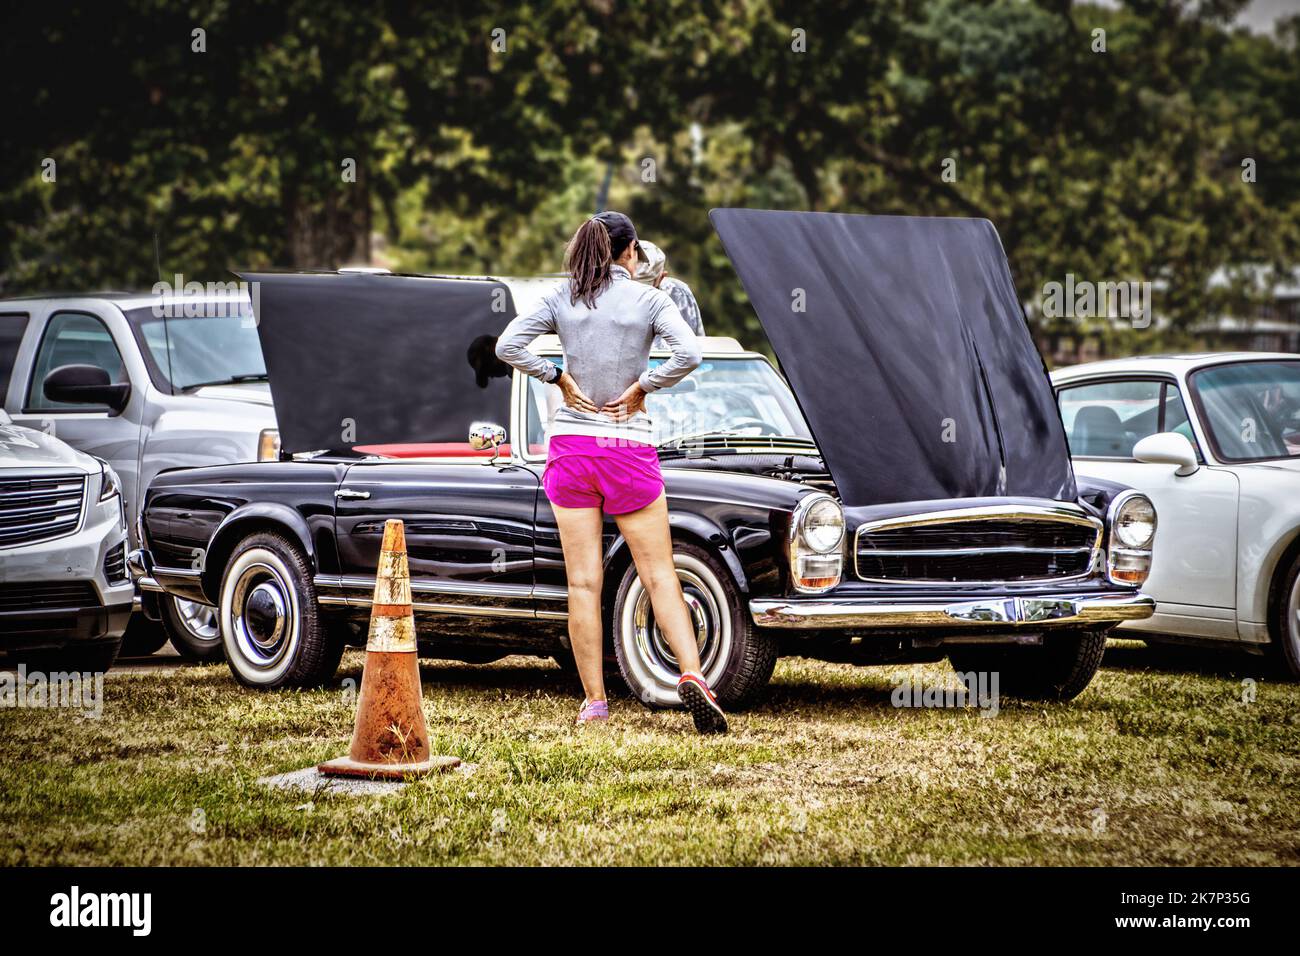 Antique car show. Woman in pink shorts checks out vintage car with hood and truck up surrounded by various other cars in grassy area with old traffic Stock Photo